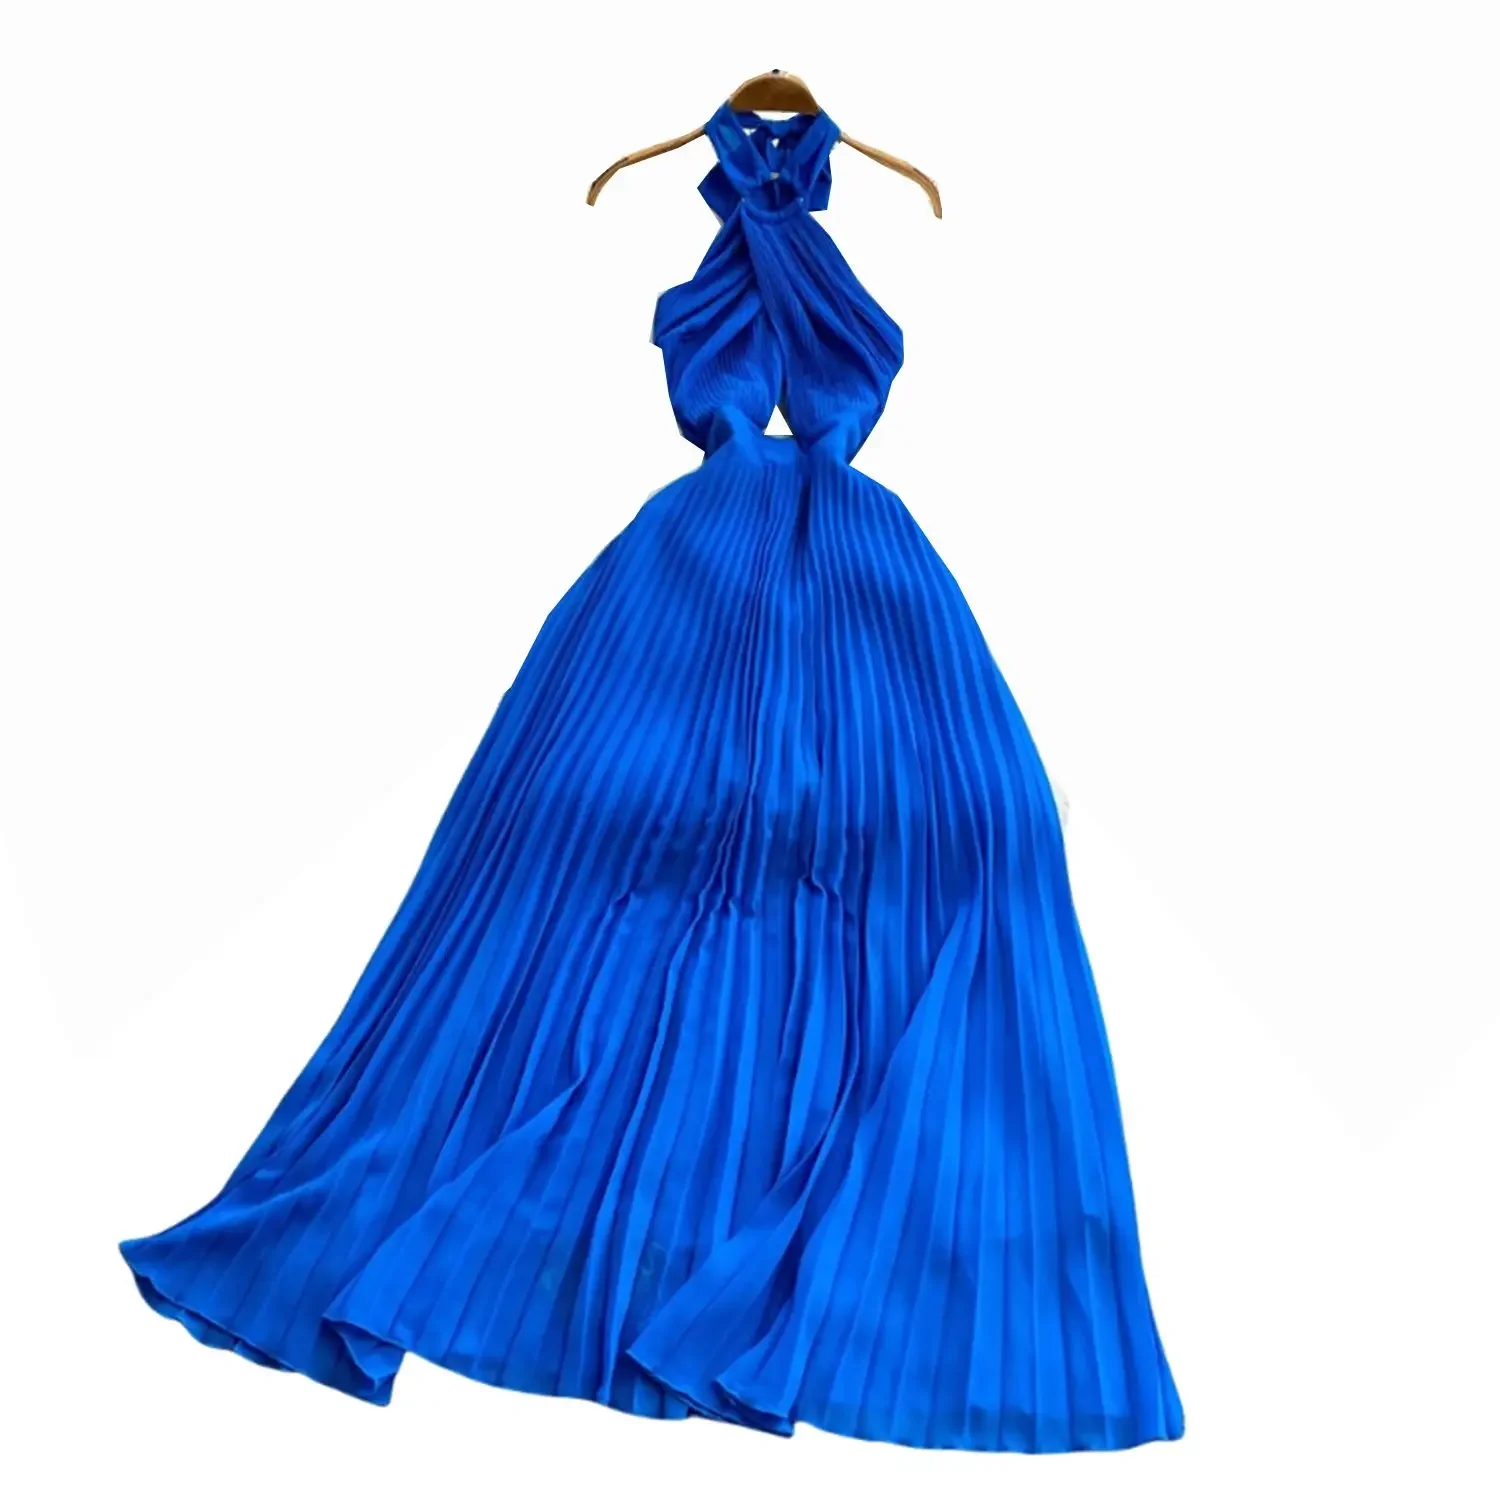 

Blue beach dress female seaside vacation super fairy swing long dress fashion French neck hanging backless pleated dress summer